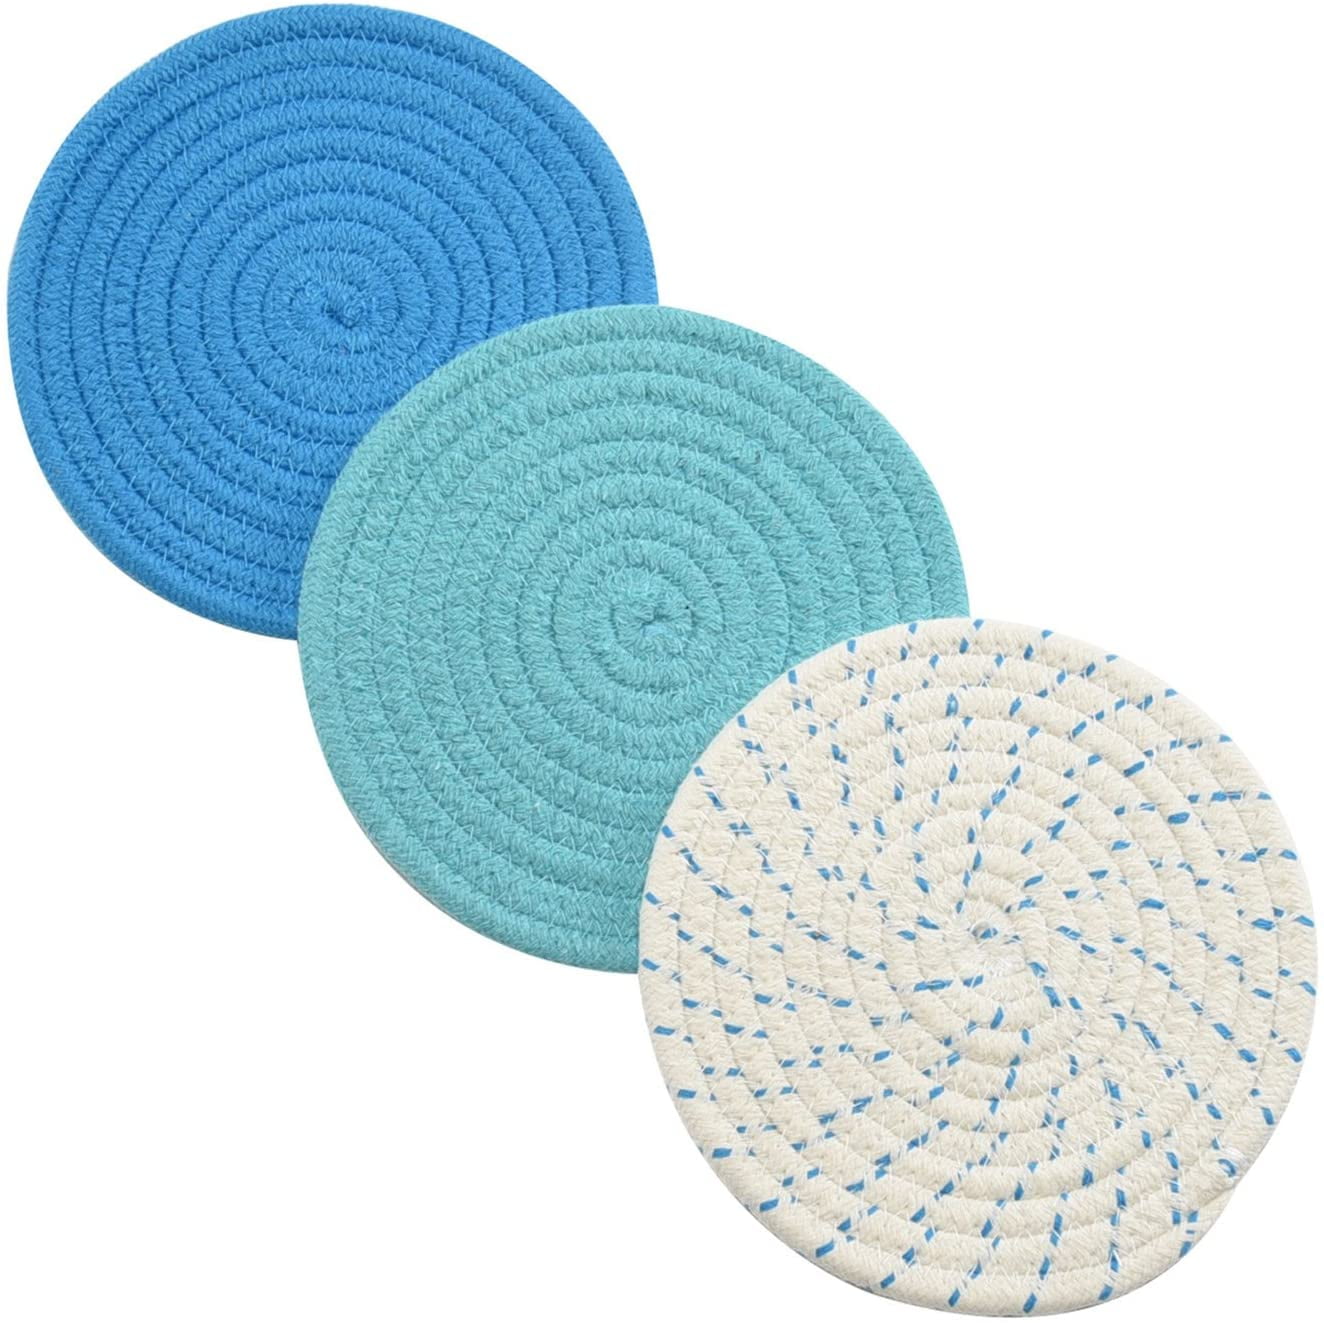 Table Countertop Protector Hot Pads Heat Resistant Potholders for Hot Dishes Pot Holders Trivets Set 4 Pcs and Kitchen Storage Basket 1 Pack Khaki Cotton Trivet Mat for Hot Pots and Pans